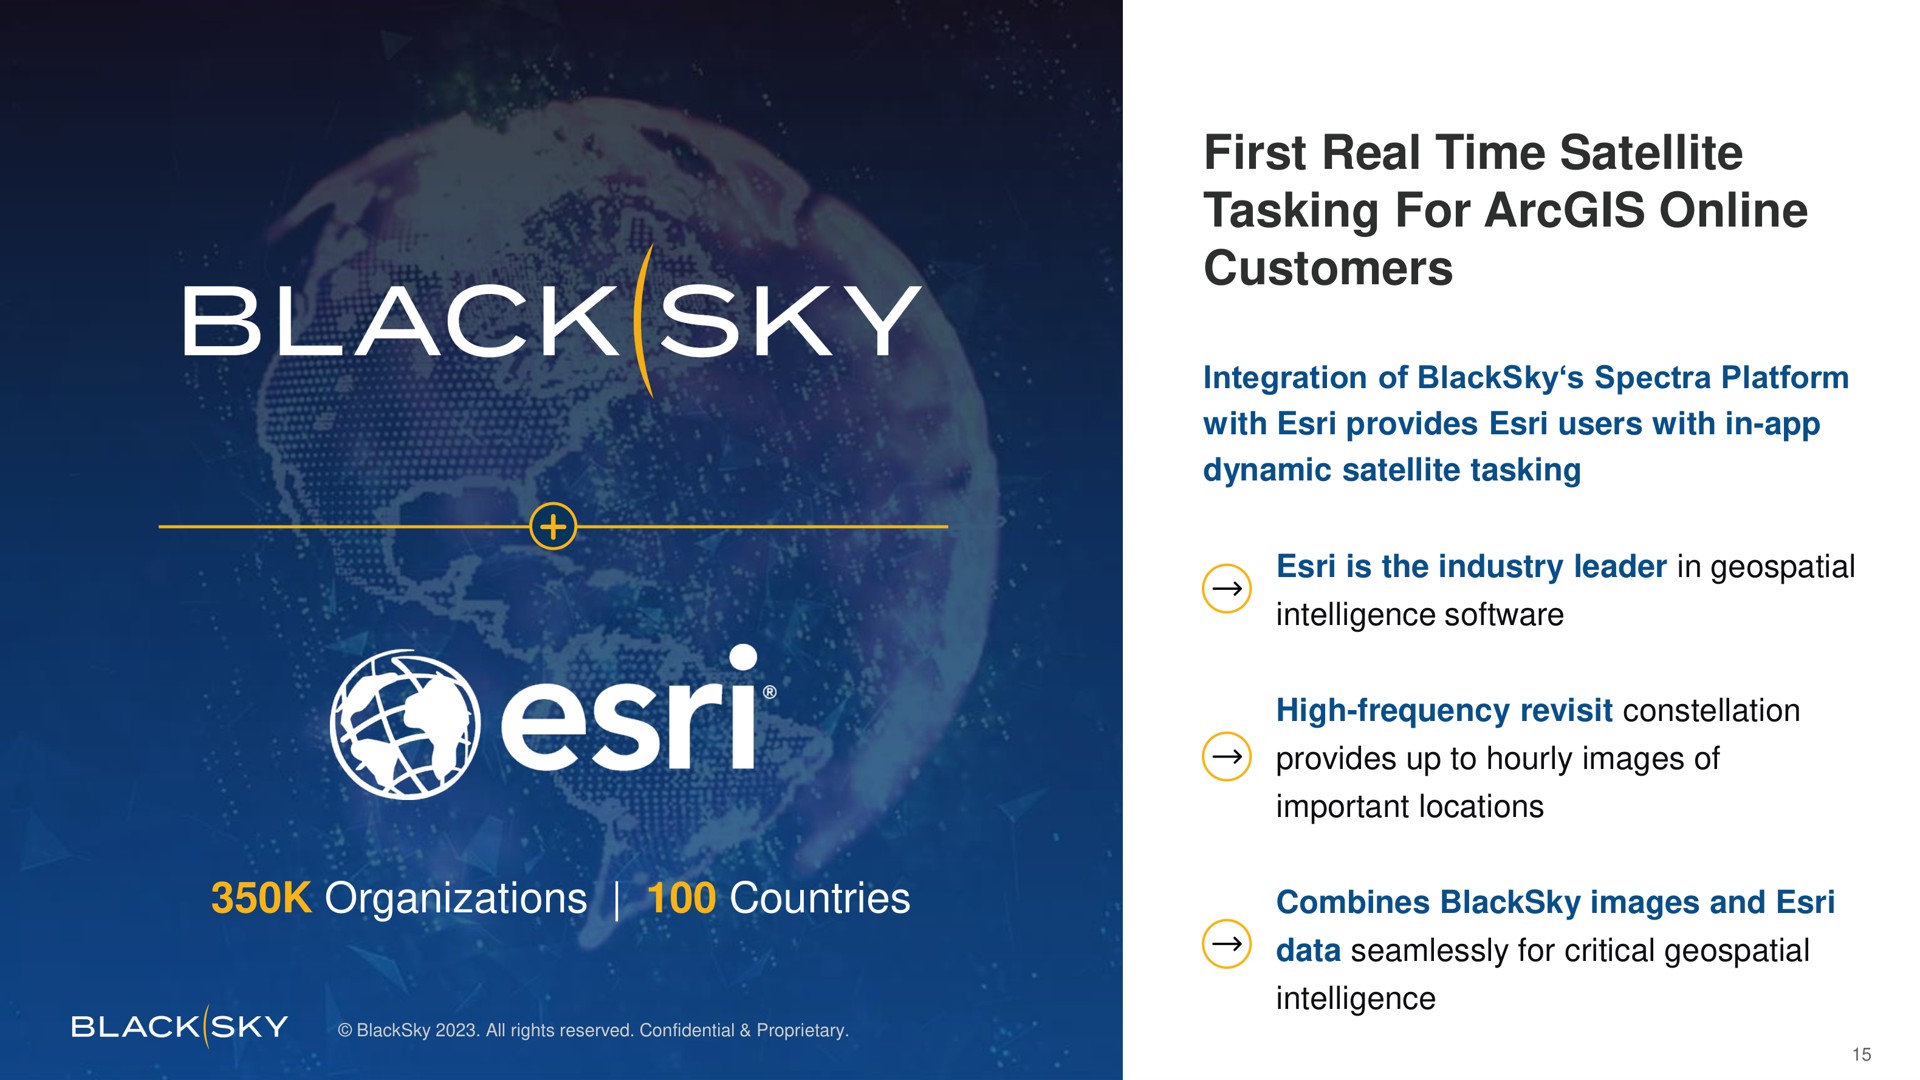 organizations countries first real time satellite tasking for customers black sky | BlackSky